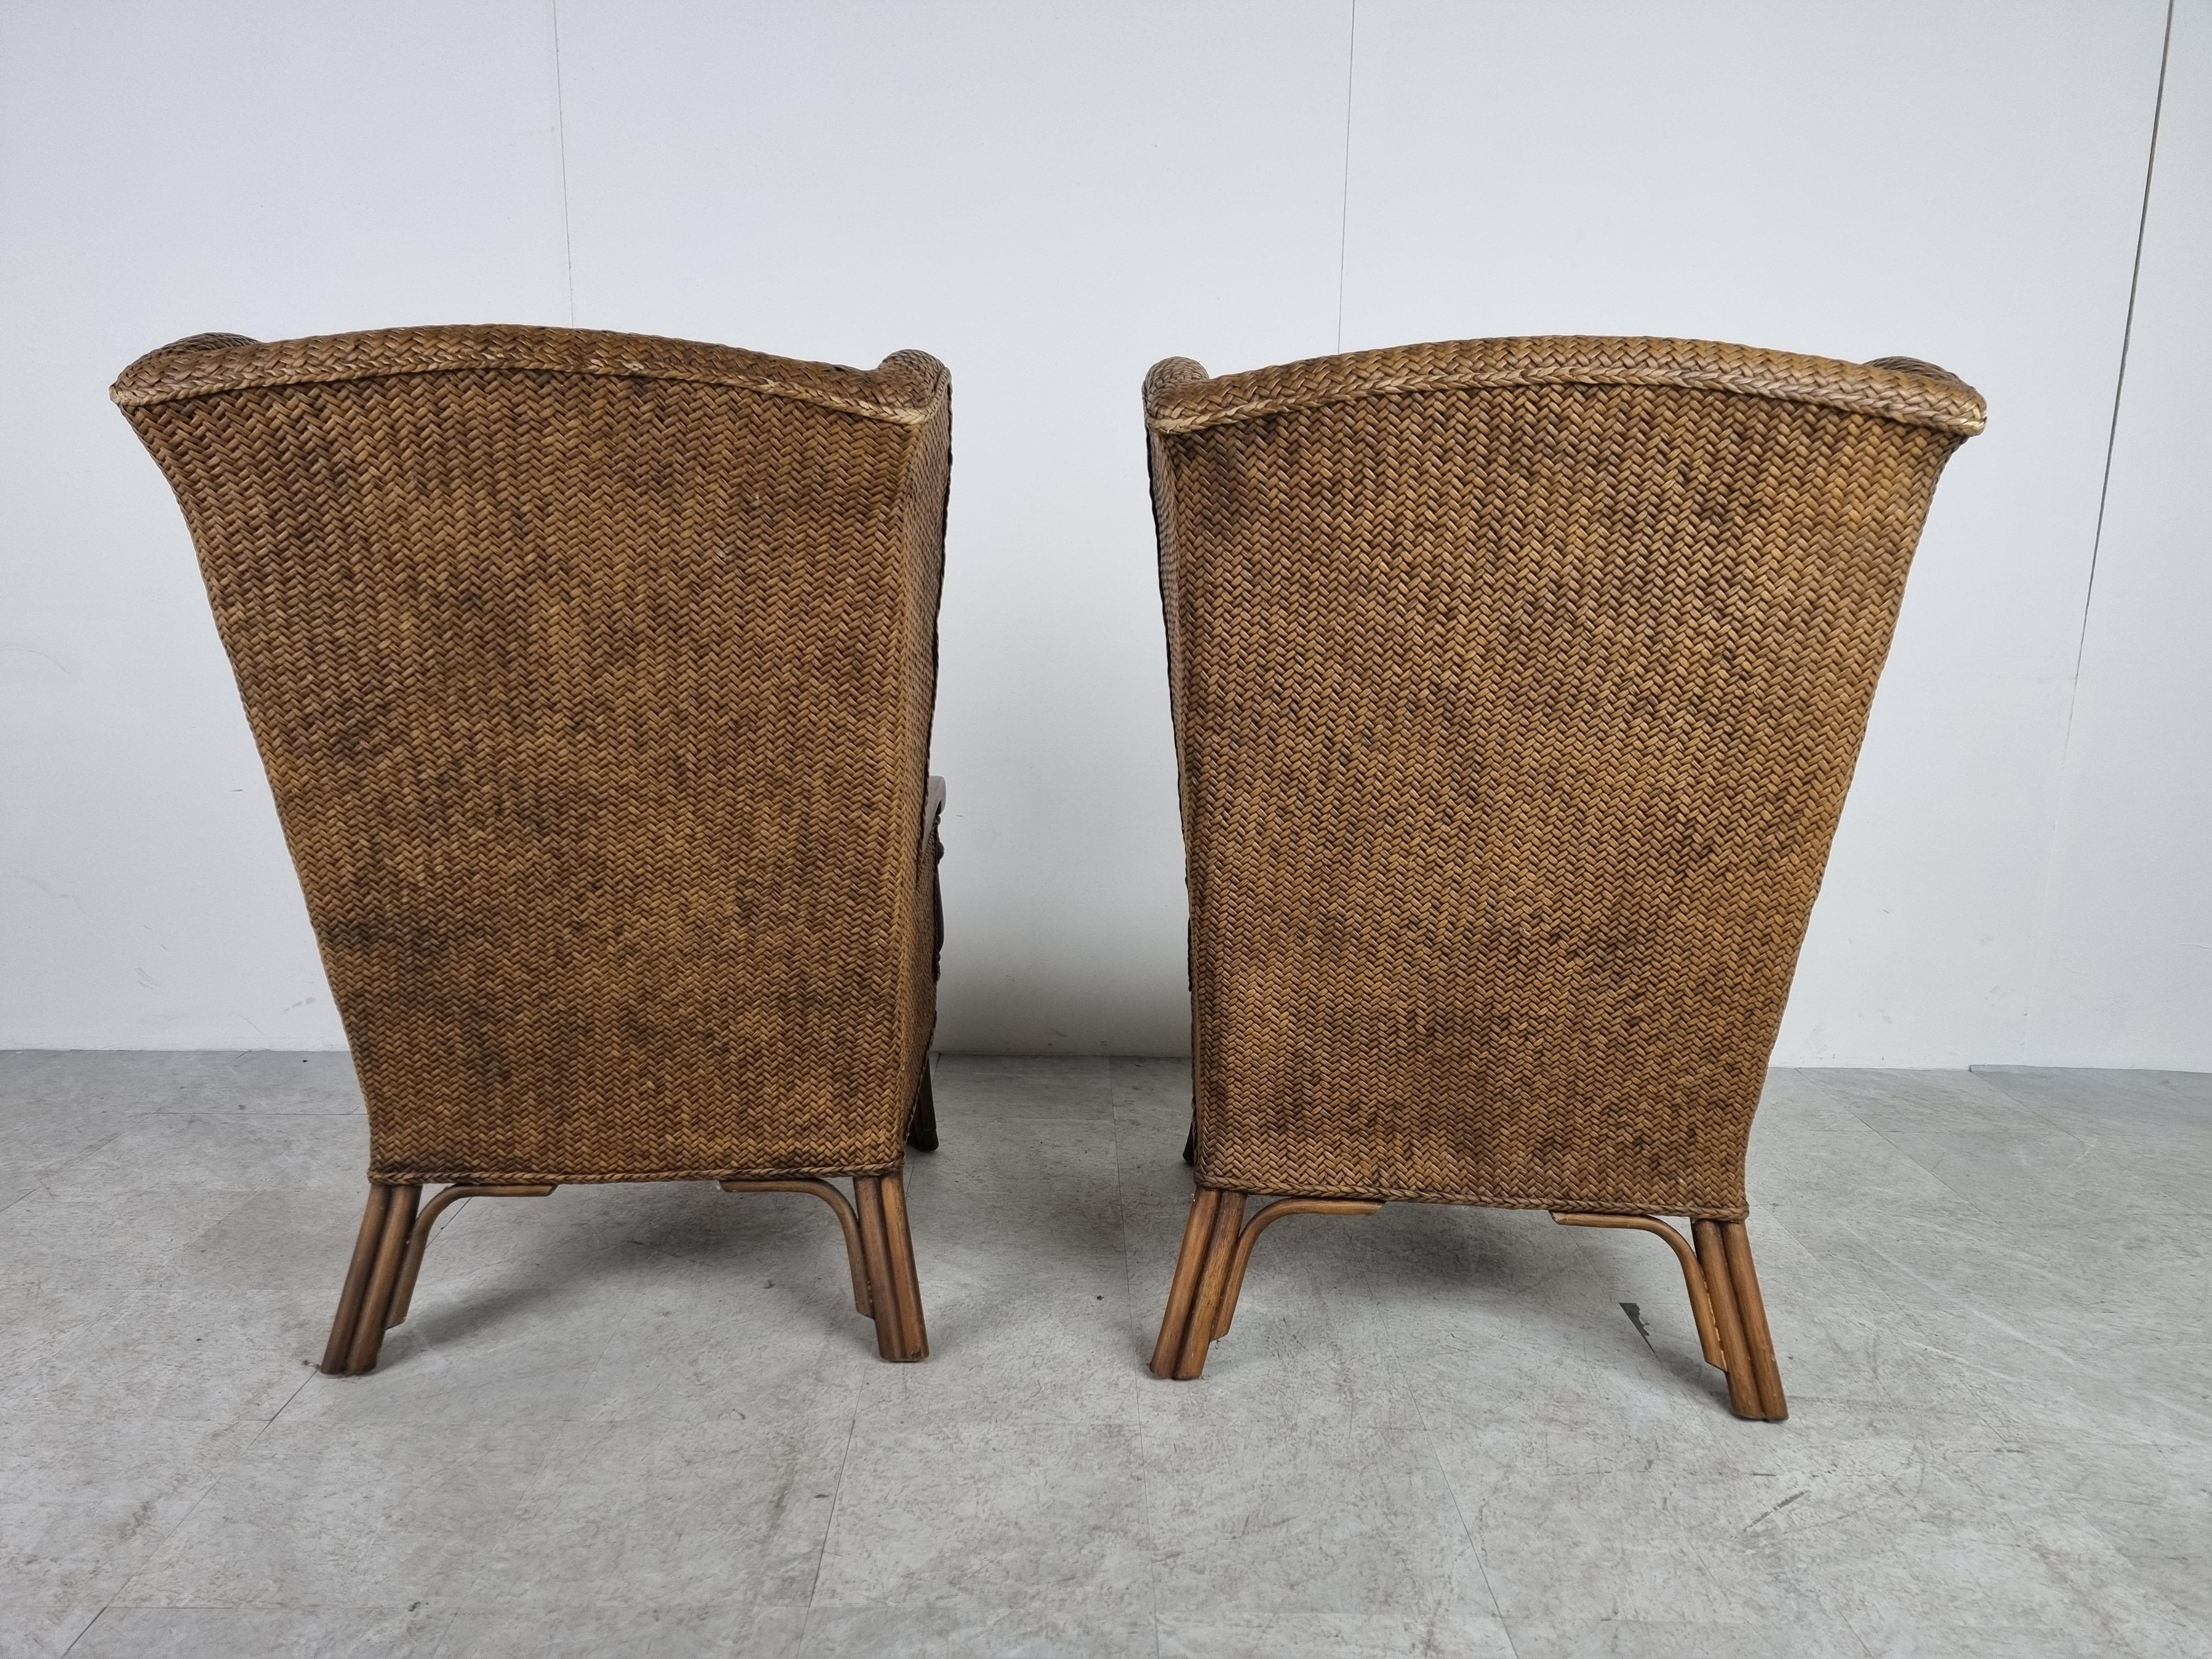 Bohemian Pair of Wicker Wingback Armchairs, 1950s